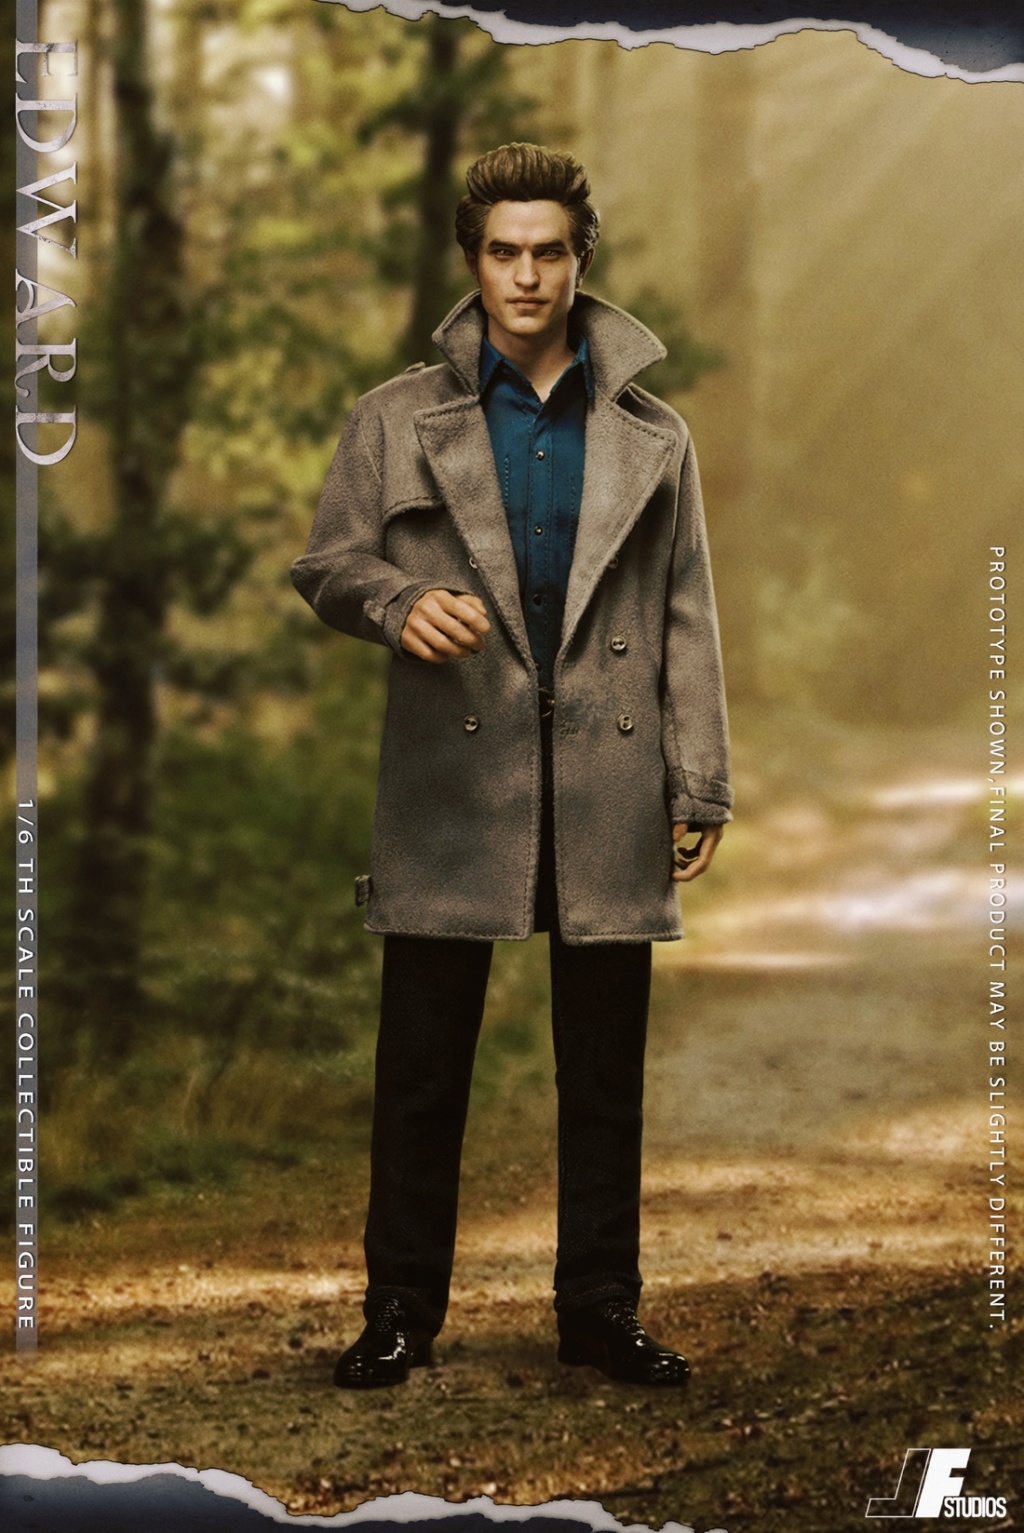 NEW PRODUCT: JF STUFIOS: Children of Twilight Series A "Edward" 1/6 Action Figure 16305810